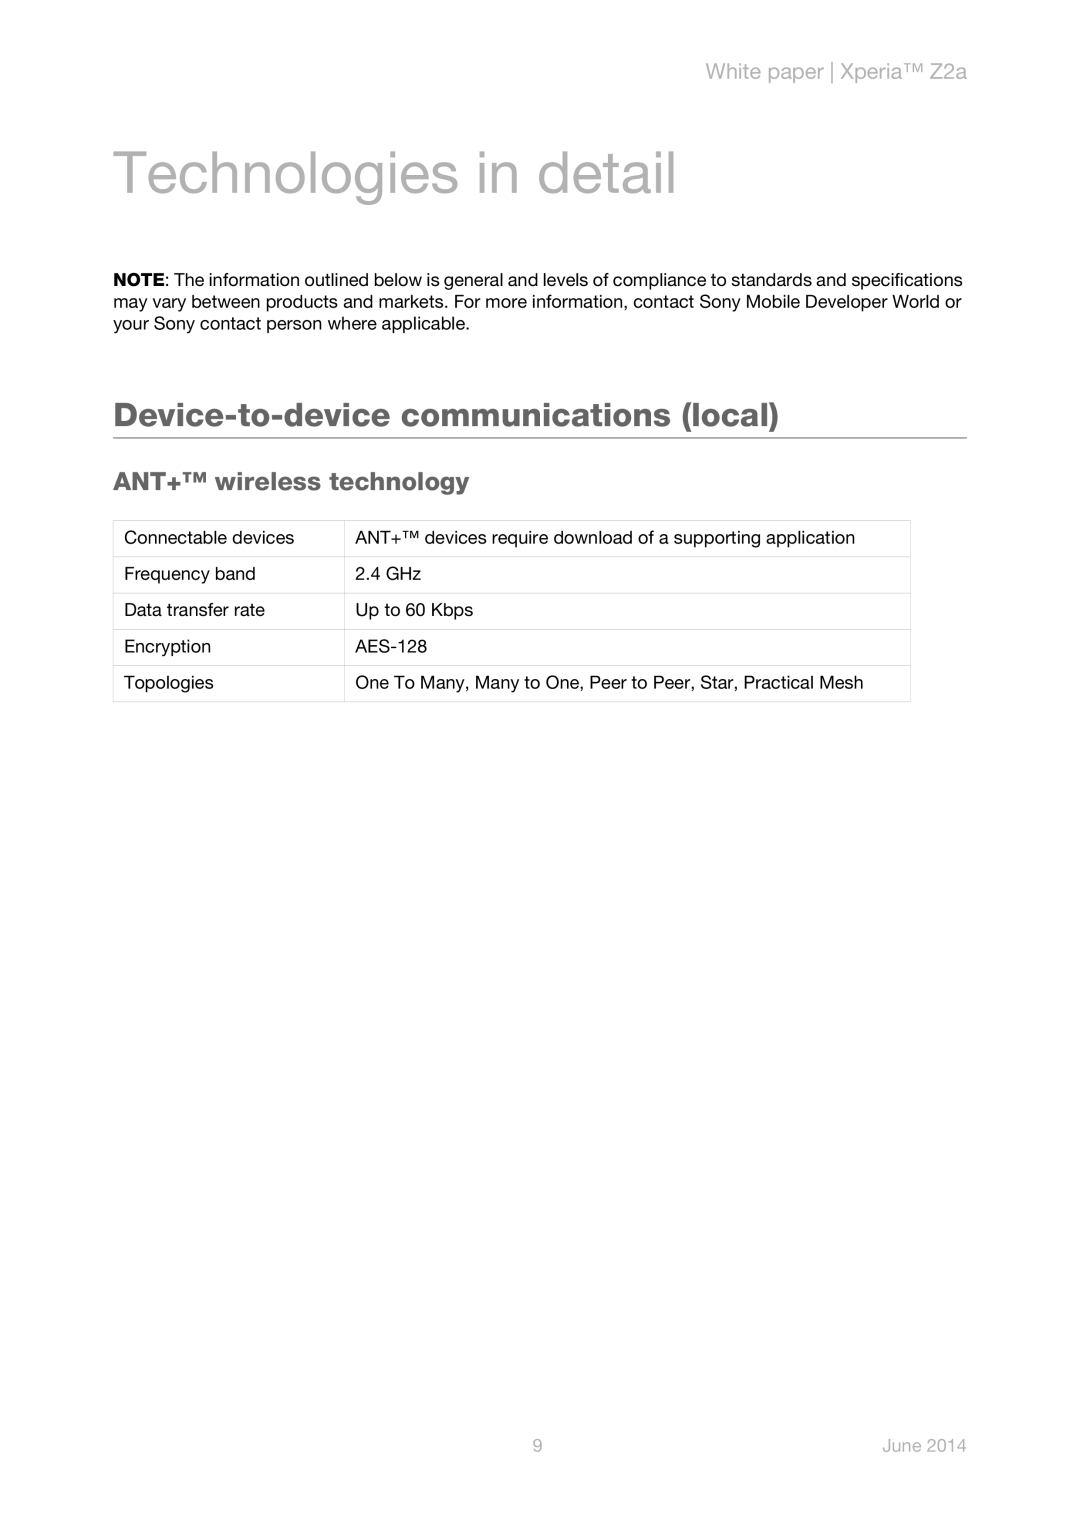 Sony Technologies in detail, Device-to-device communications local, ANT+ wireless technology, White paper Xperia Z2a 